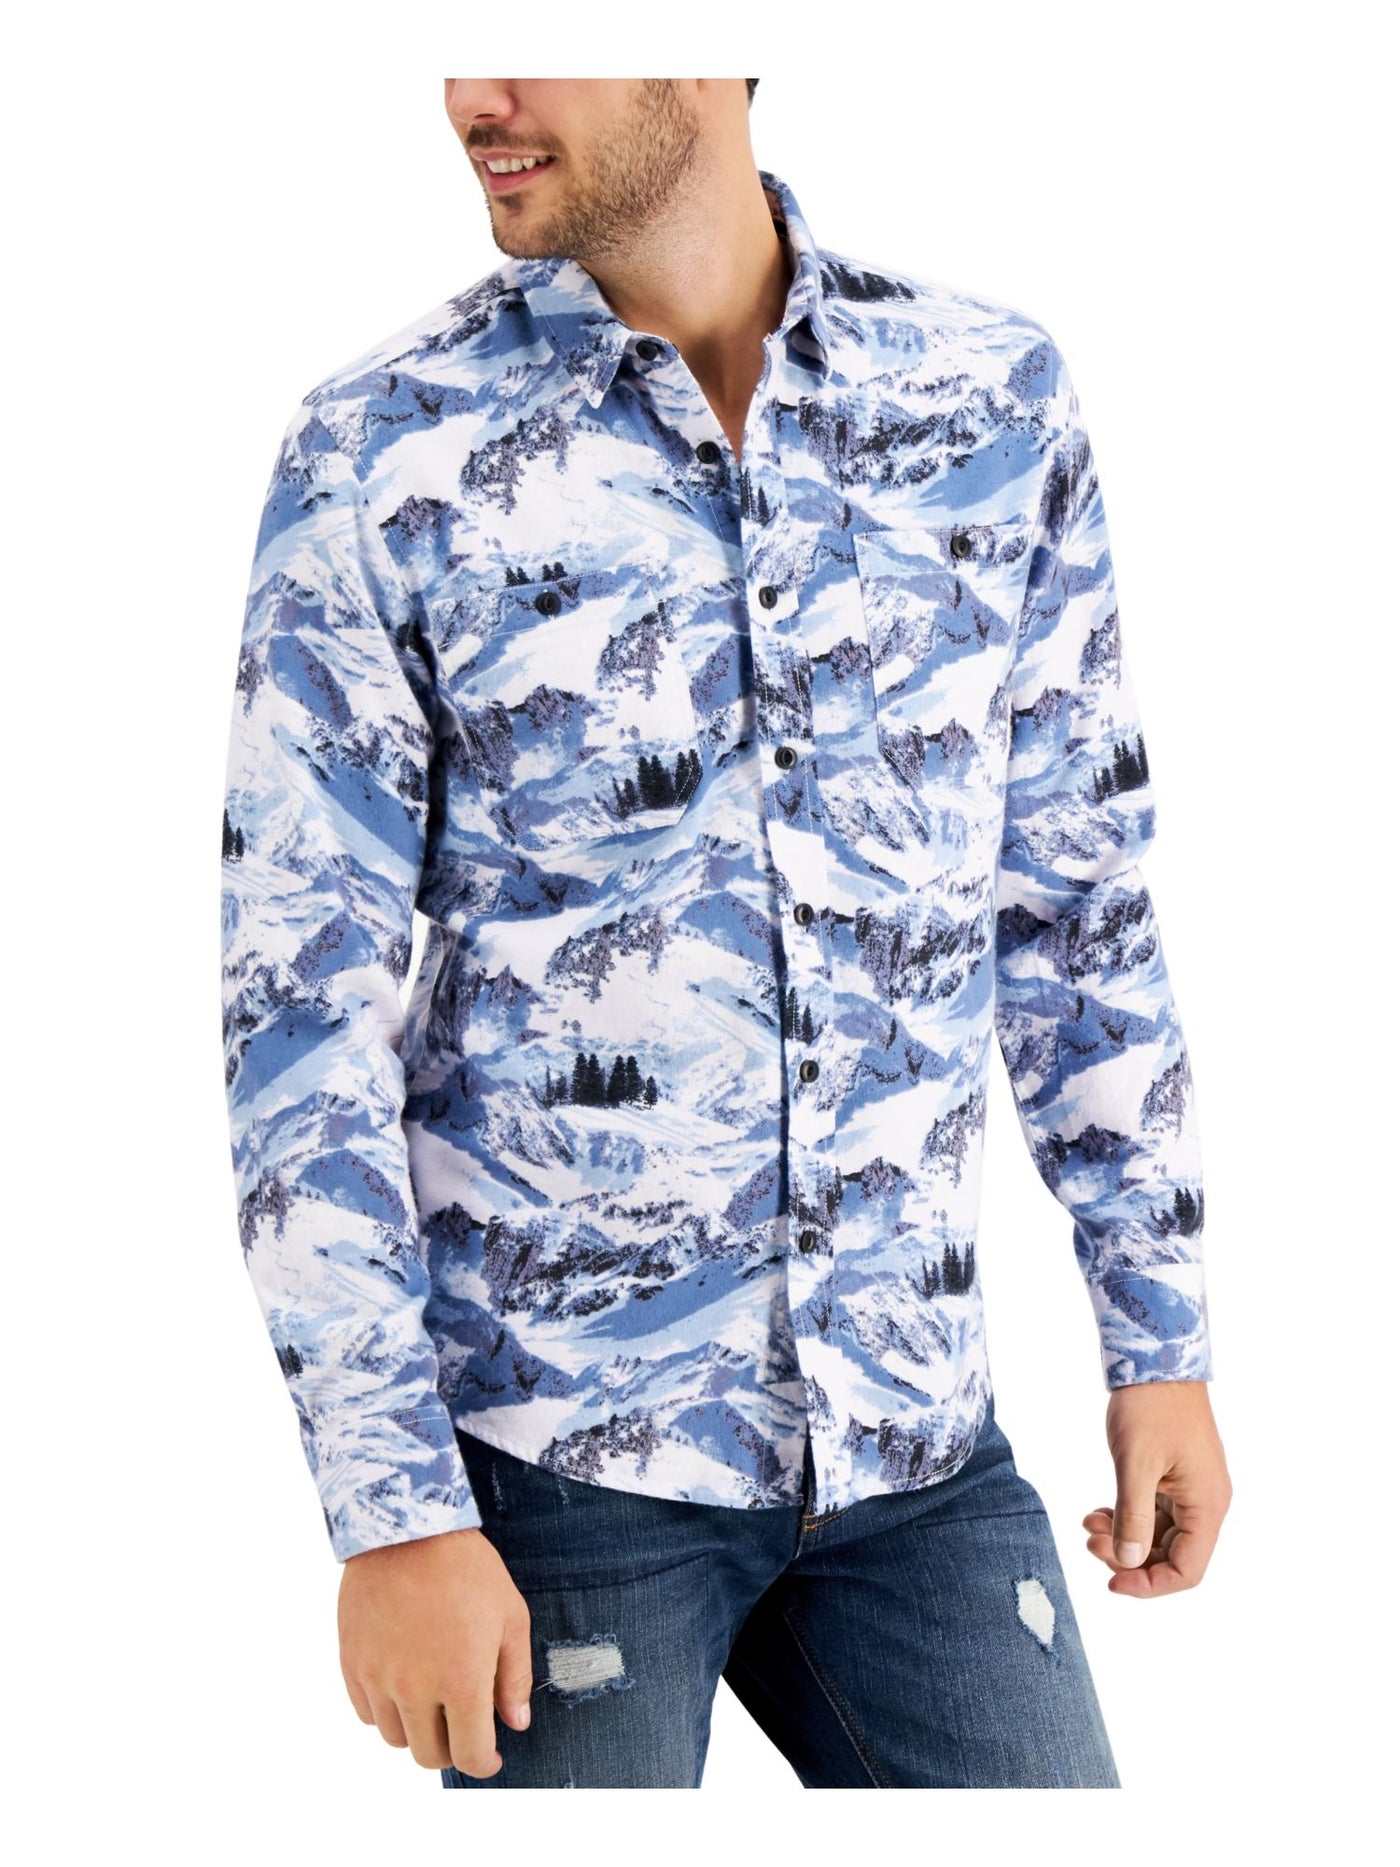 SUN STONE Mens Winter Slopes Blue Printed Long Sleeve Classic Fit Button Down Cotton Casual Shirt XXL